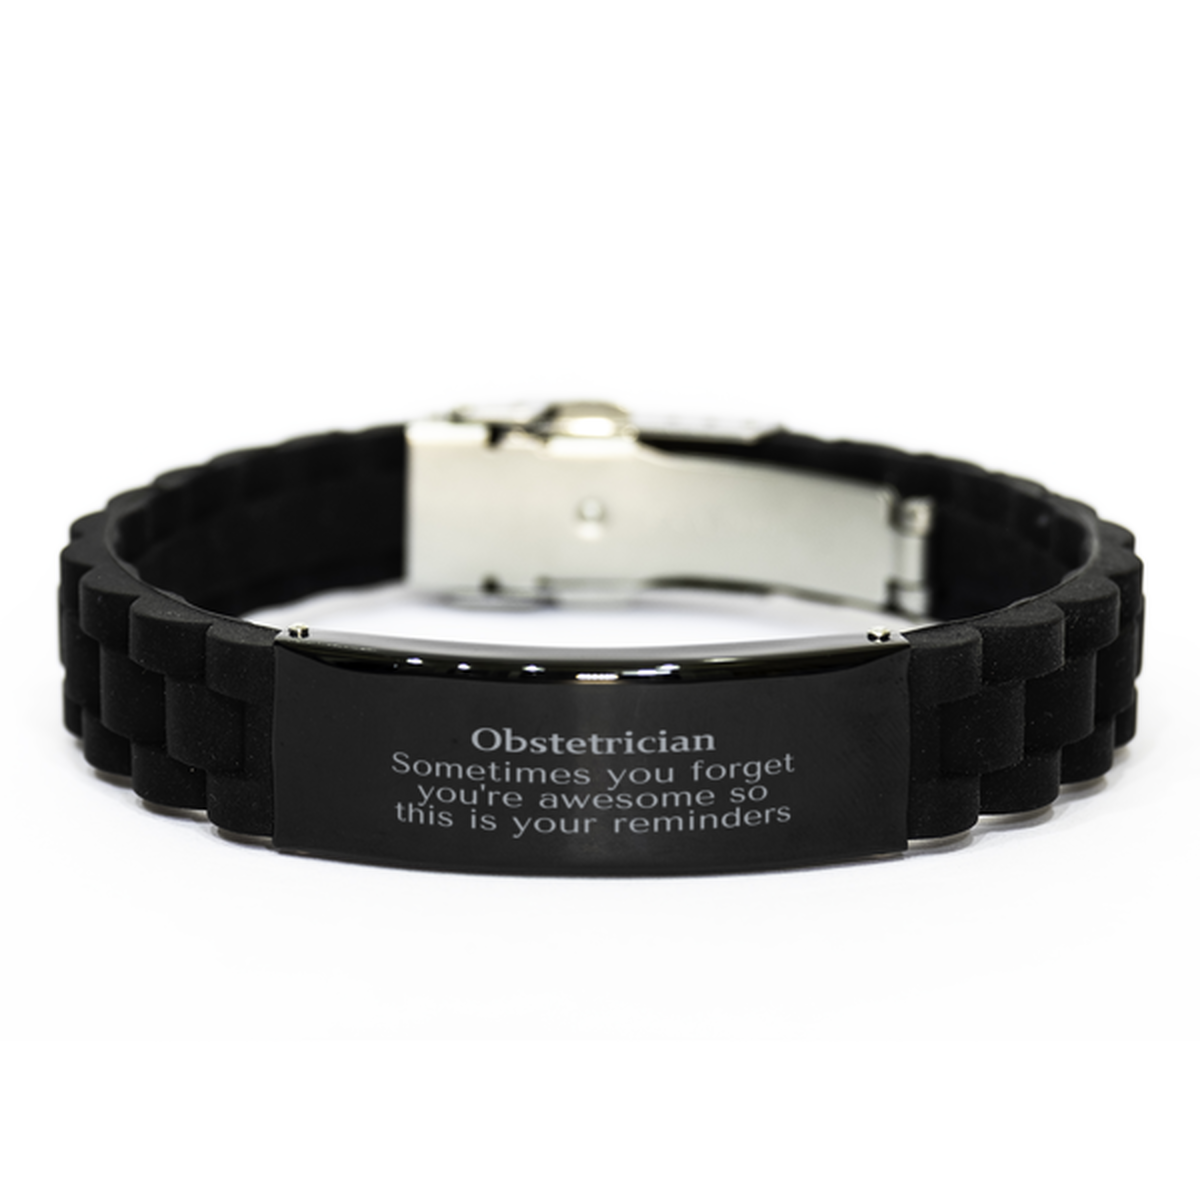 Sentimental Obstetrician Black Glidelock Clasp Bracelet, Obstetrician Sometimes you forget you're awesome so this is your reminders, Graduation Christmas Birthday Gifts for Obstetrician, Men, Women, Coworkers